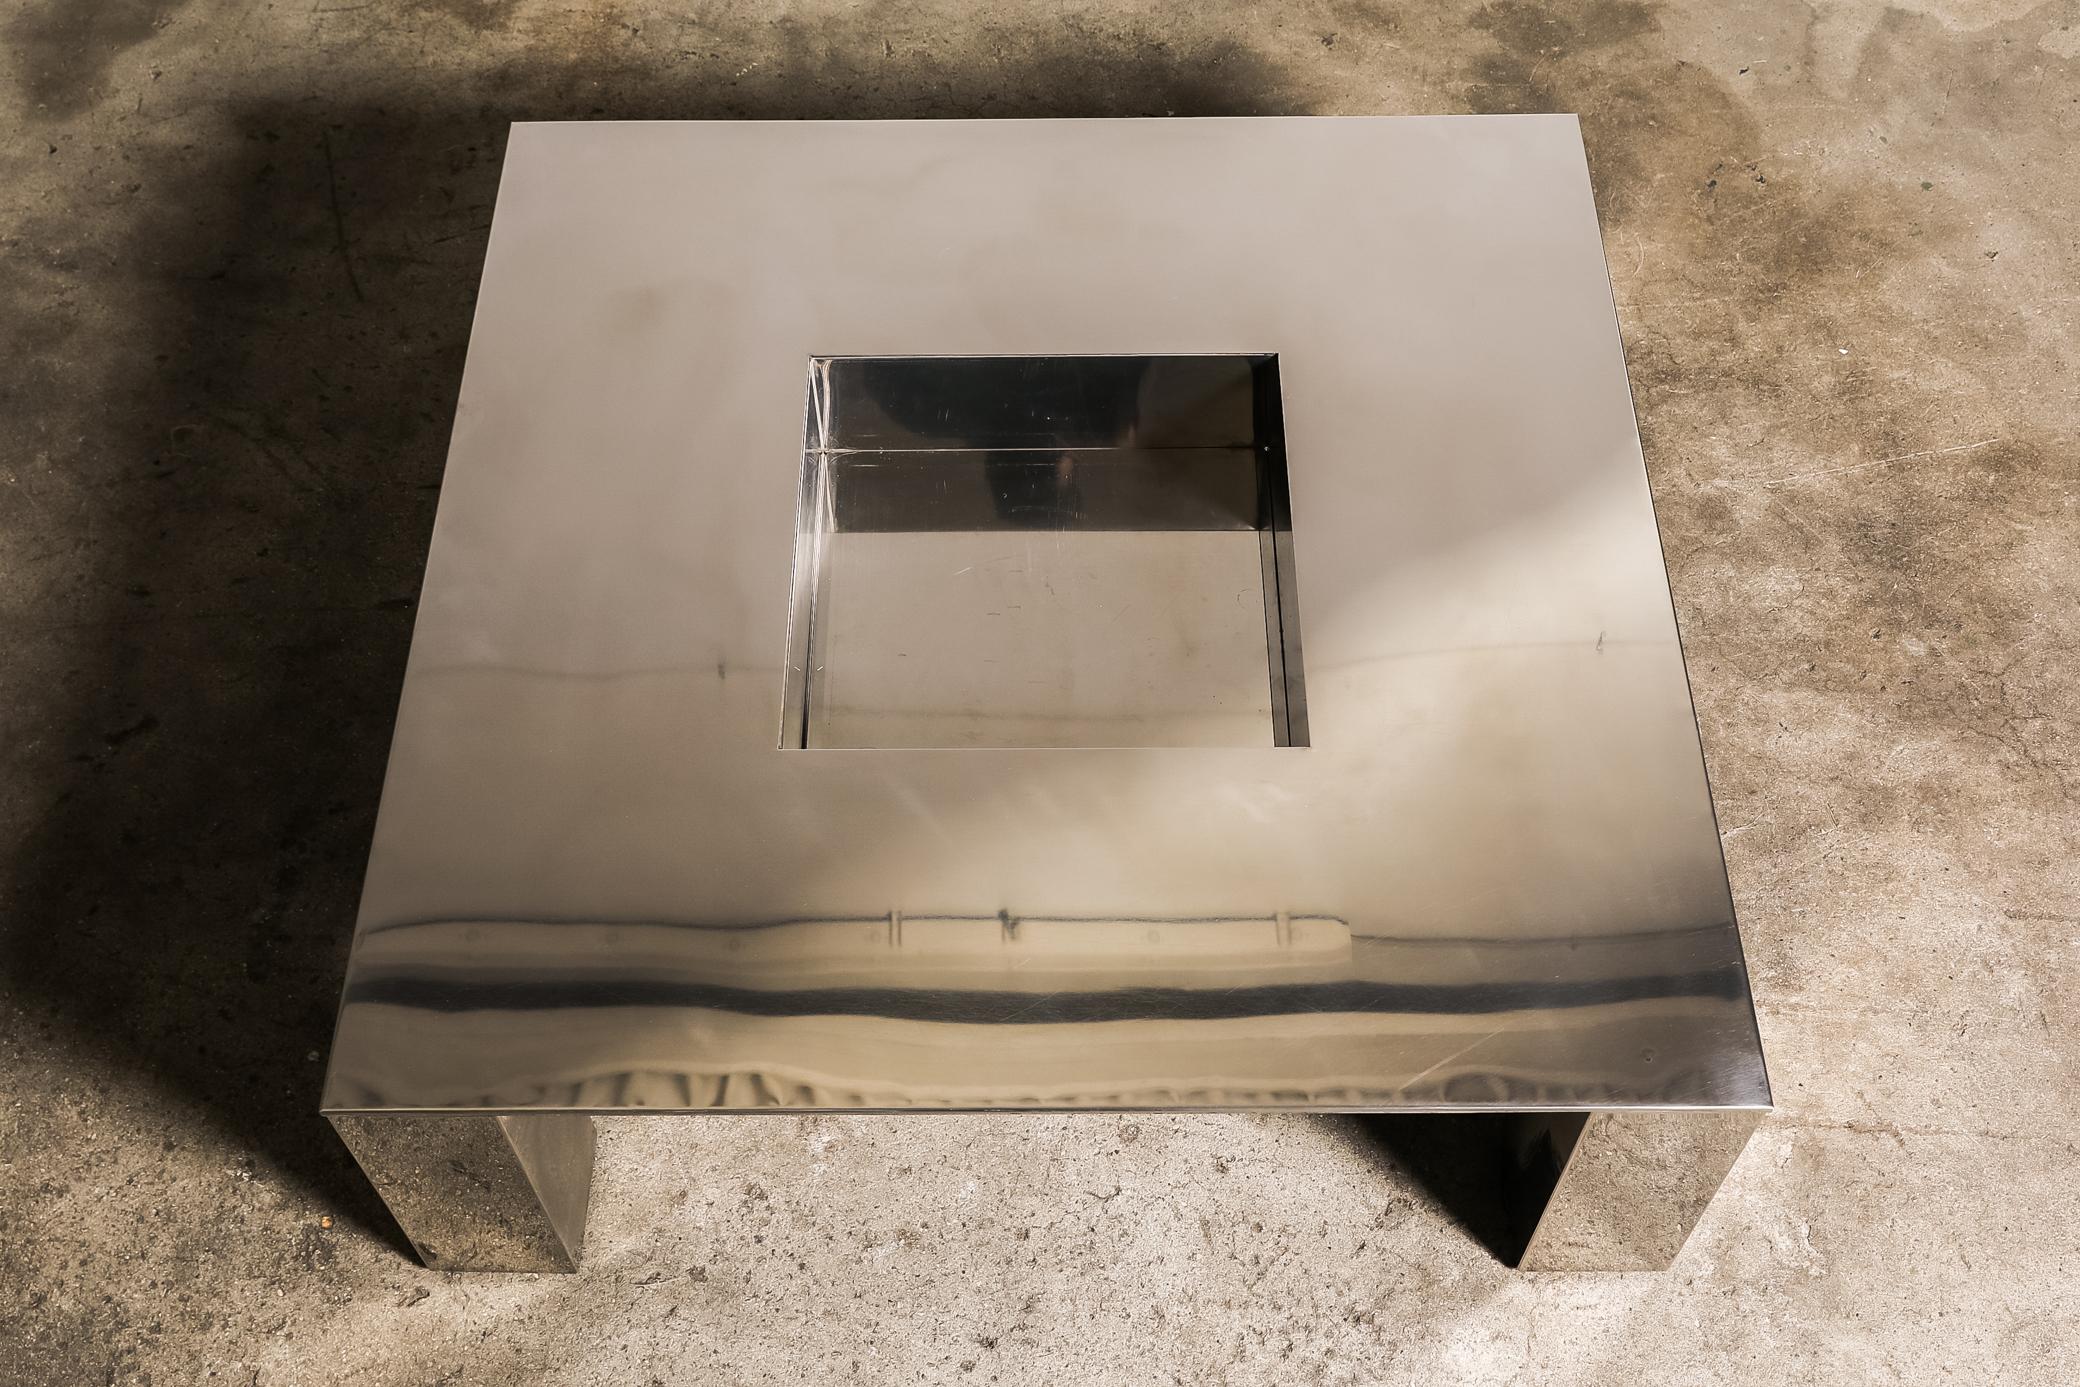 “Tebe” coffee table designed by Giovanni Offredi for Saporiti, Italia. Made from polished steel with central recessed compartment which can be used as a dry bar or for plants, circa 1970, Italy. Dimension: L 99 cm x W 99 cm H 33 cm.